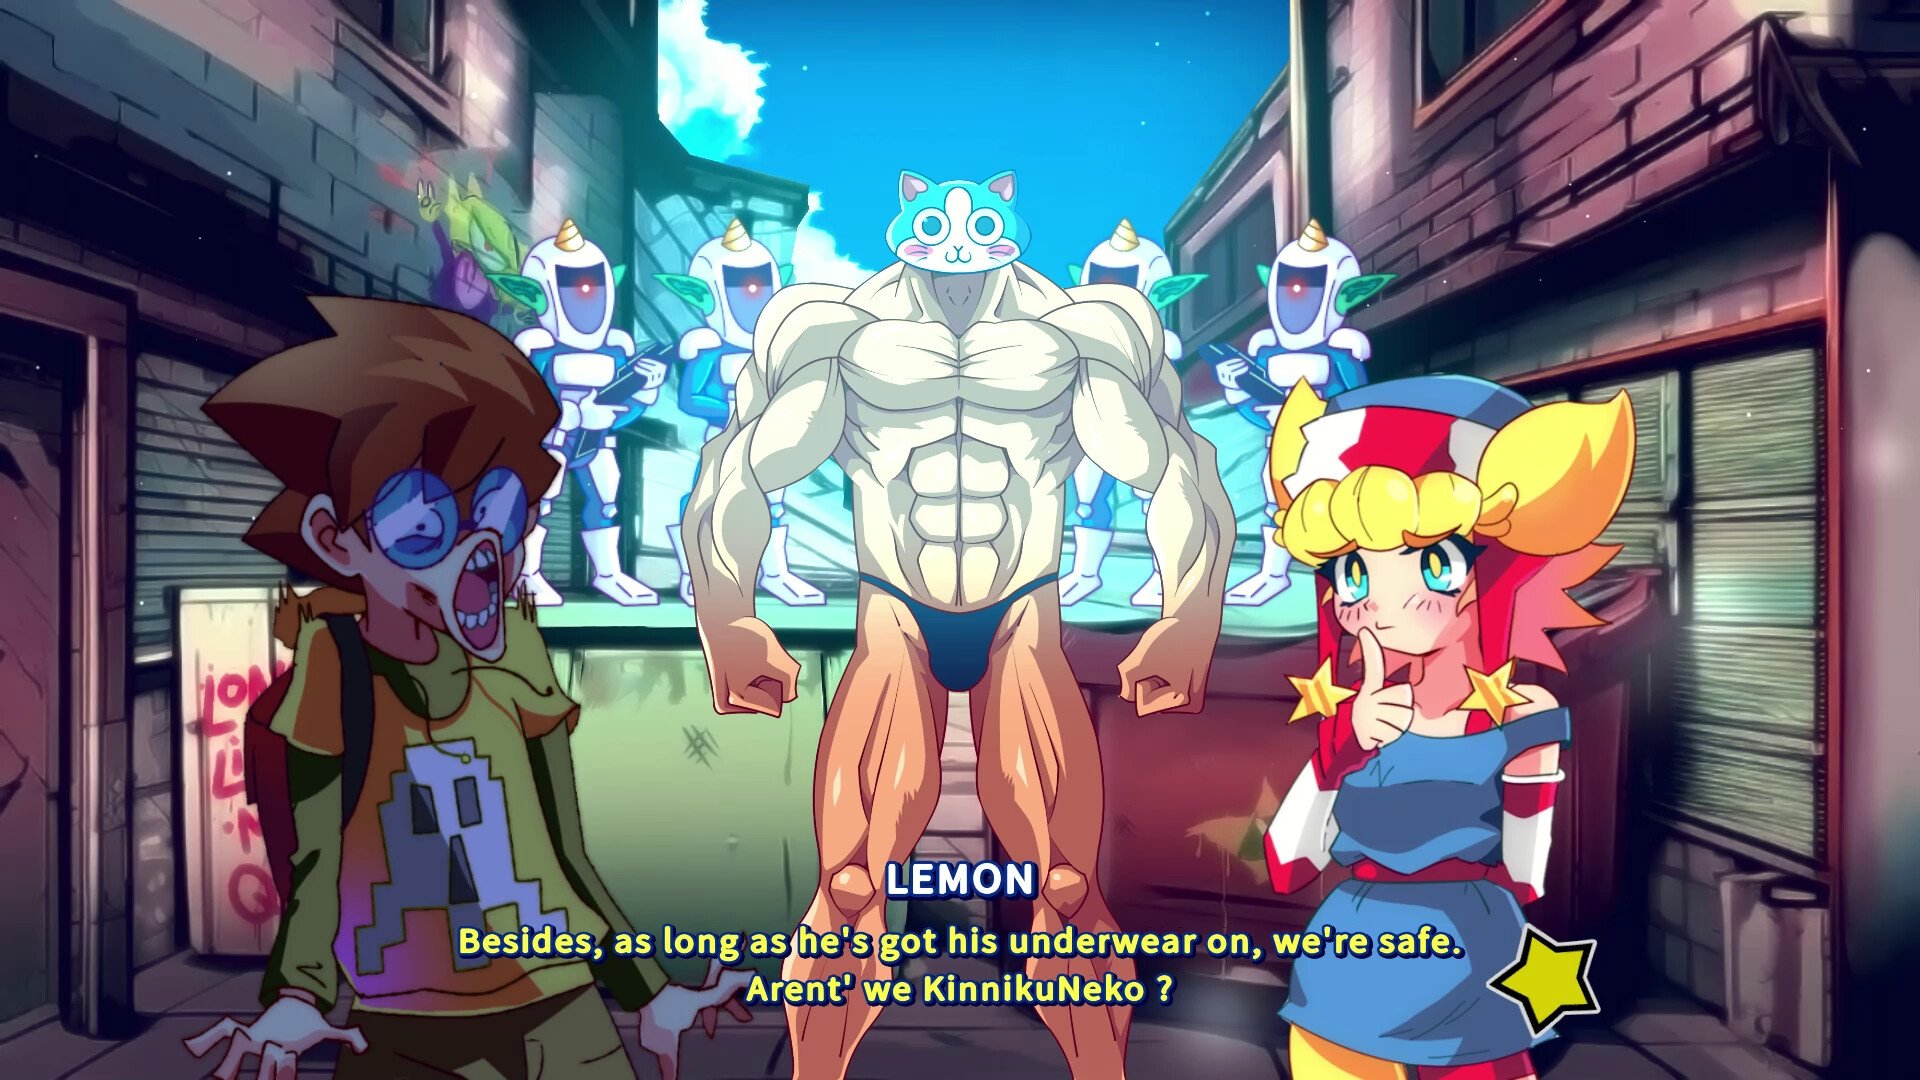 the image shows a white buff human body with a blue cutesy cat head in a toony style. The legs of the buff cat-man hybrid are a red gradient. To either side of the cat are his companions who are humans, the boy on the left is pulling a shocked face and the girl on the right has a happy grin. Behind the characters are an assortment of robotic like characters